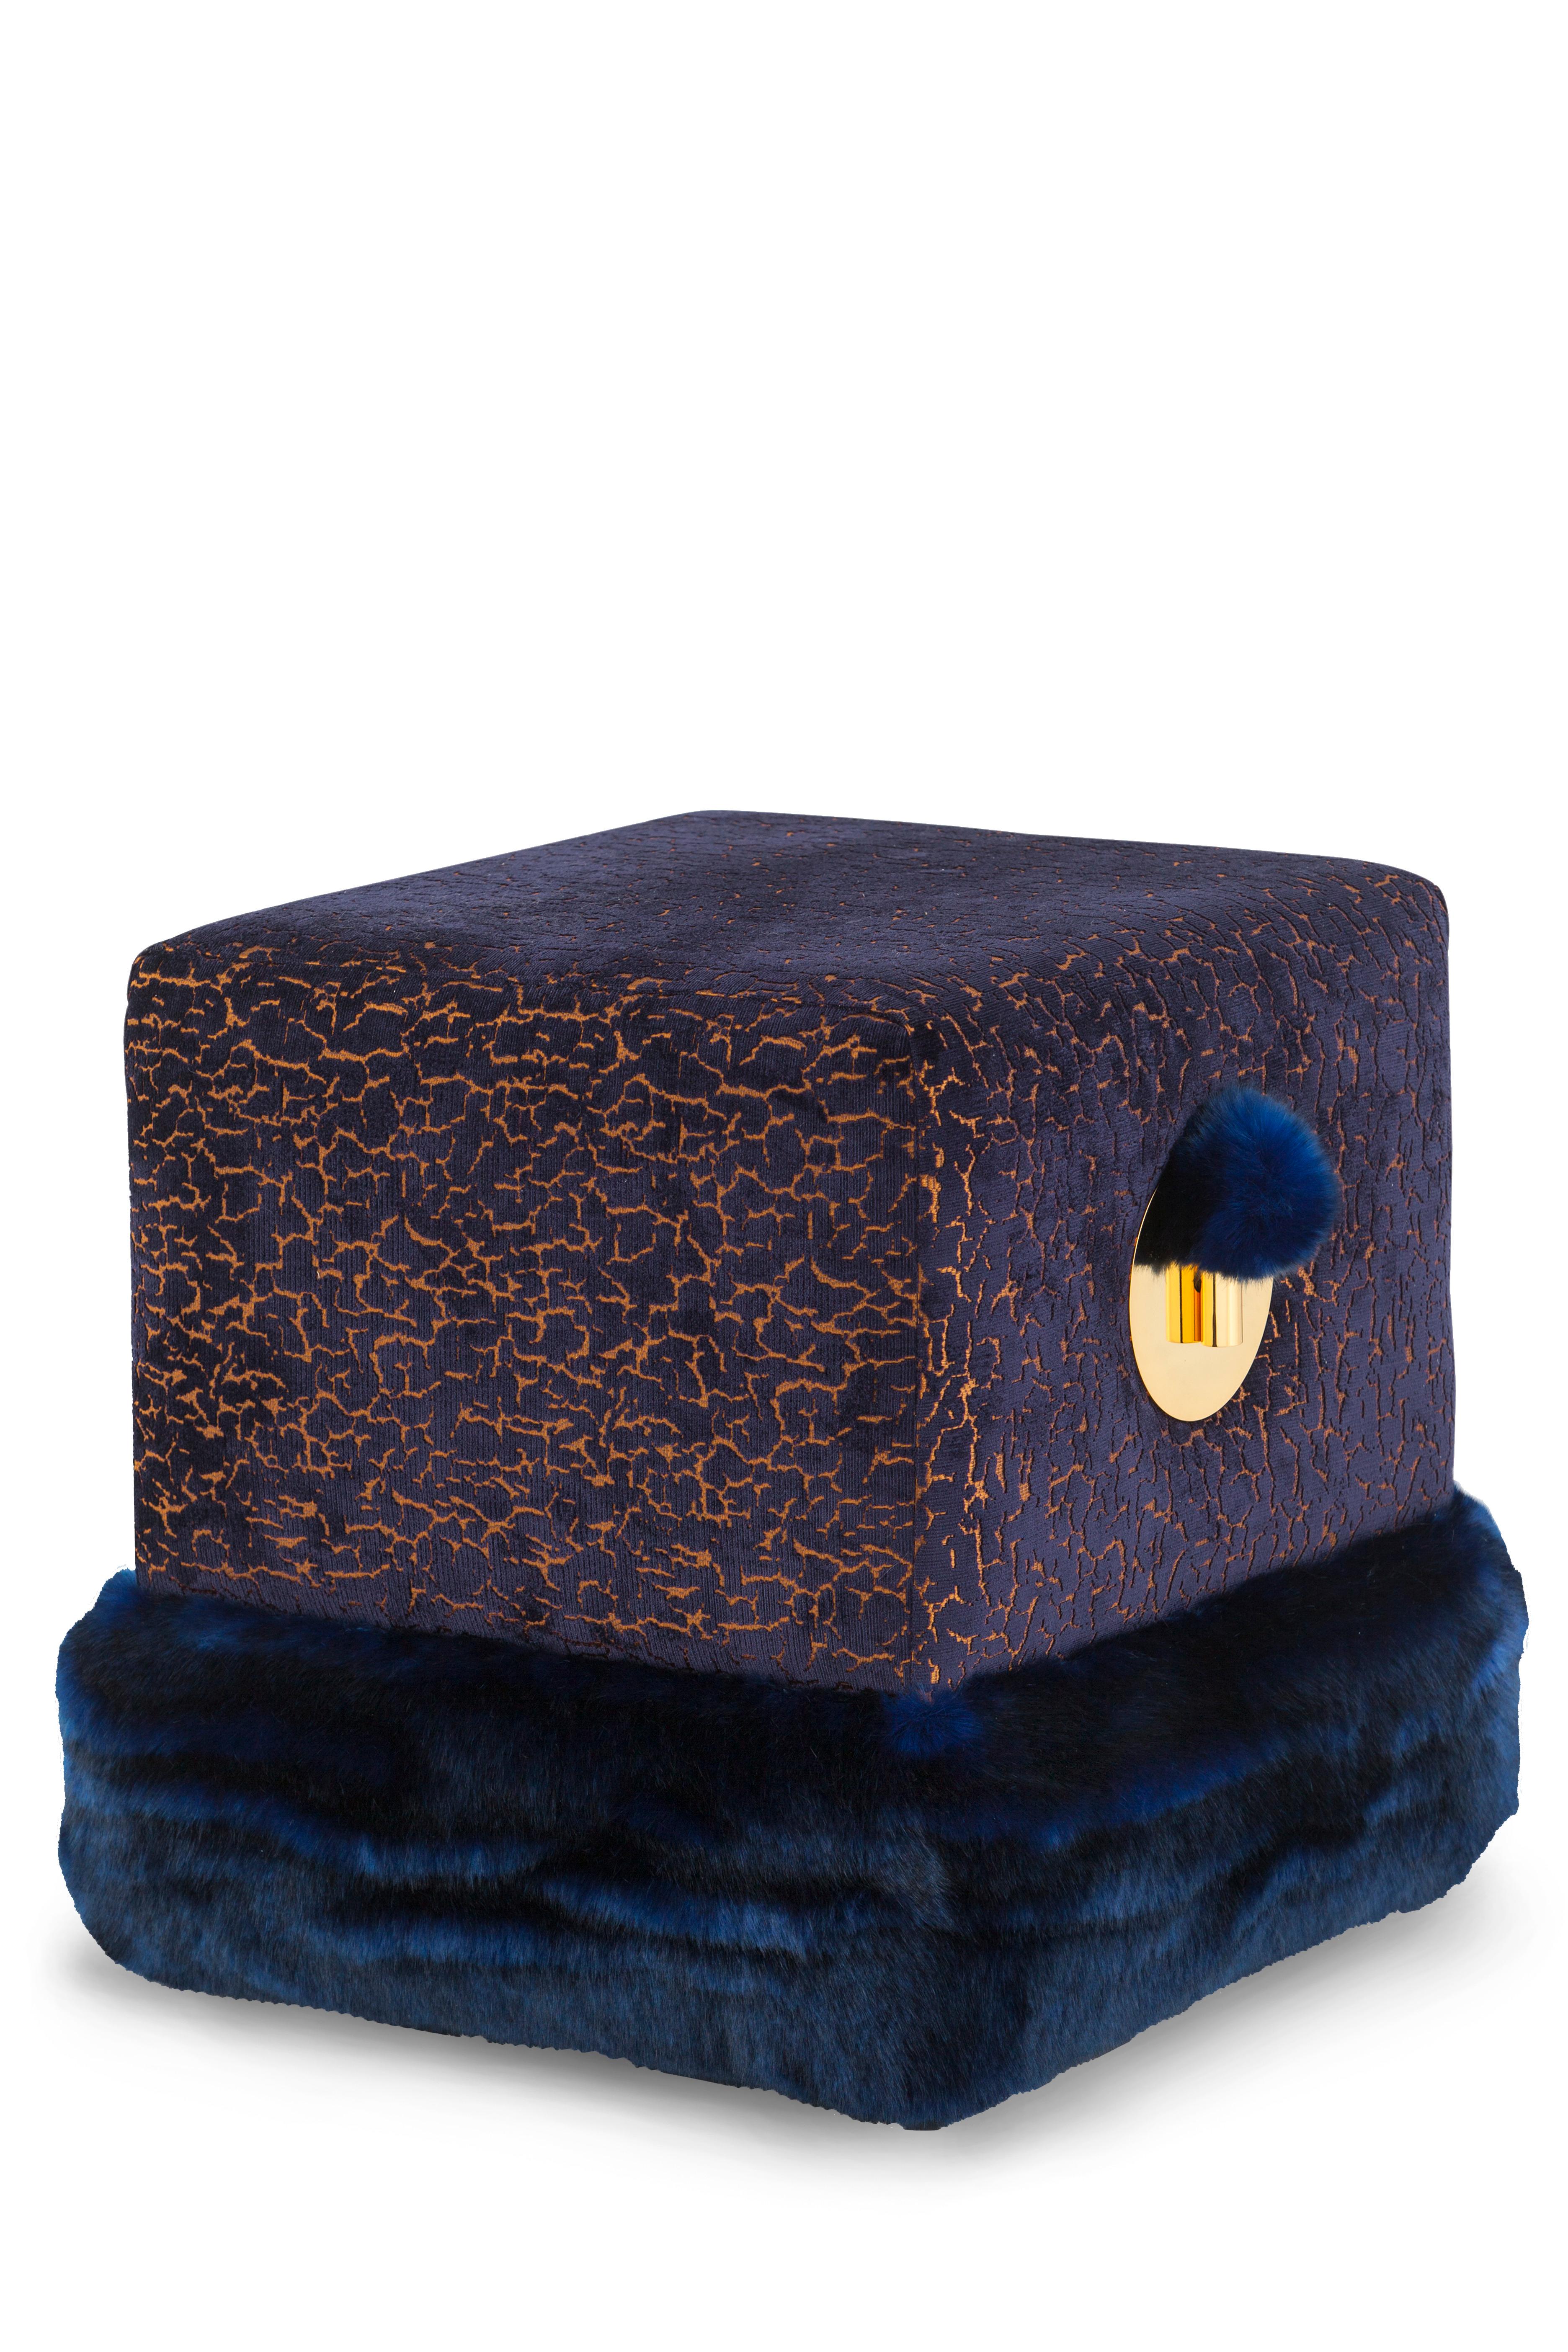 Flox Pouf, Modern Collection, Handcrafted in Portugal - Europe by GF Modern.

A comfy pouf stool with a luxurious touch. Upholstered in blue faux fur and blue velvet jacquard, Flox stands out on its own in any room interior. Destined to beautify